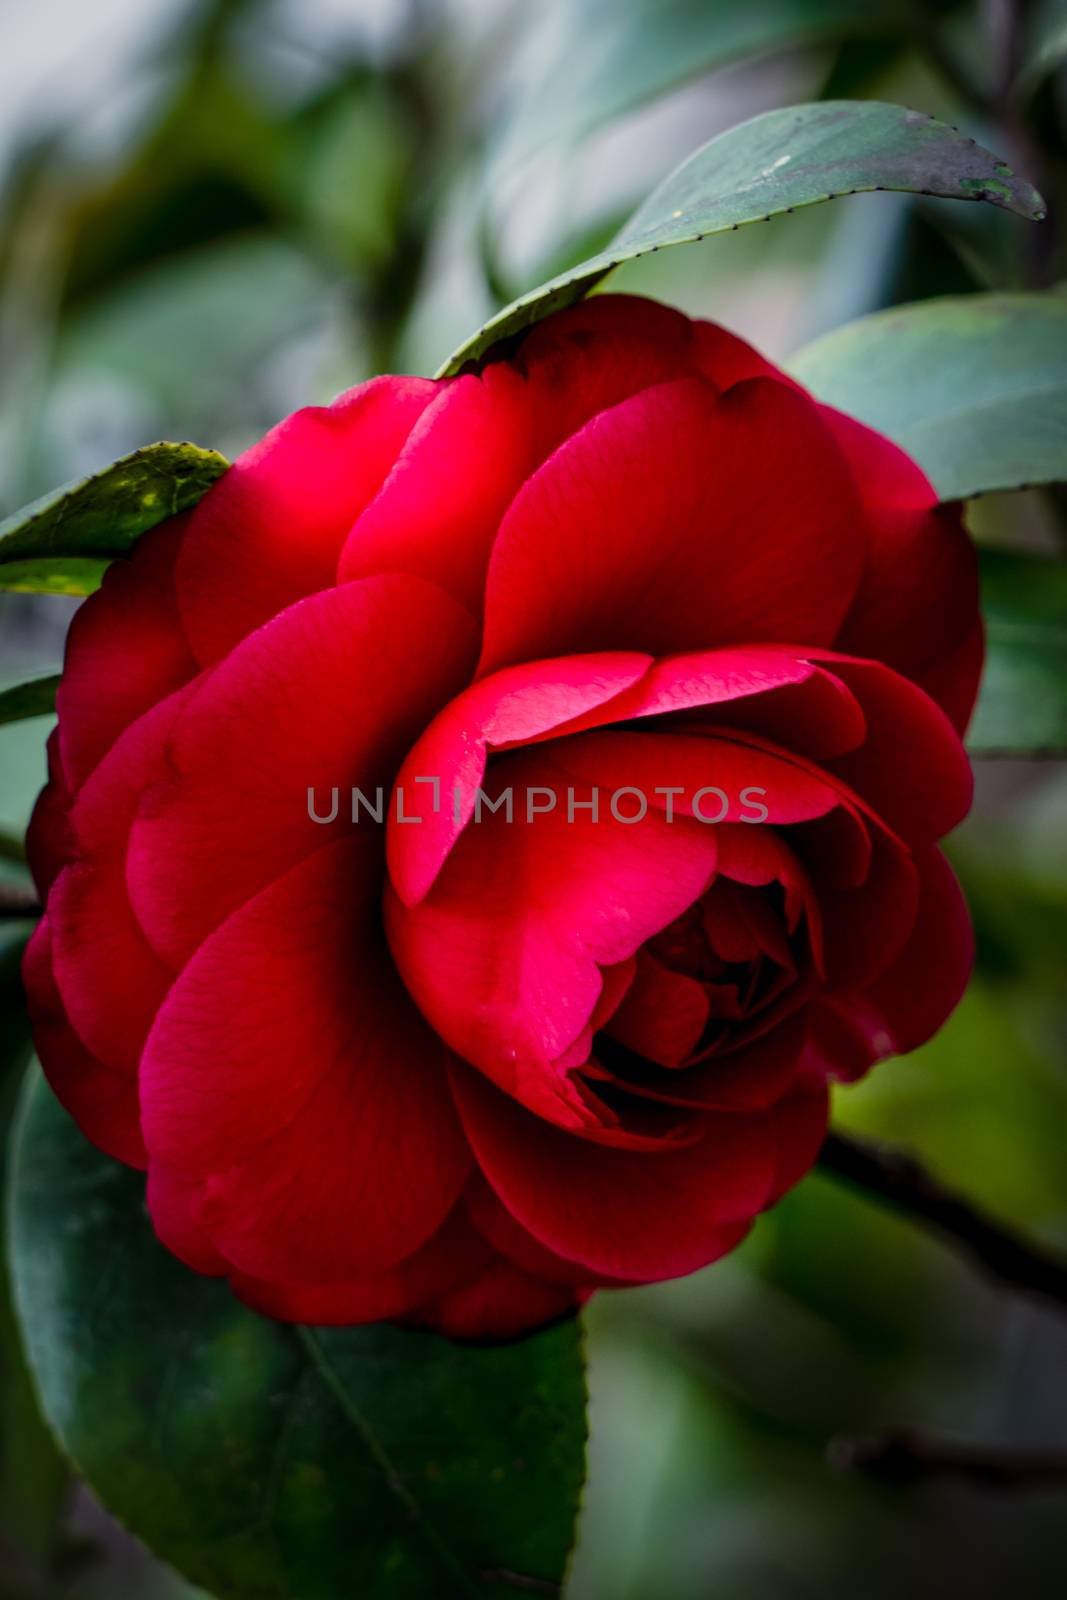 Red rose on the tree in blurred background by psodaz